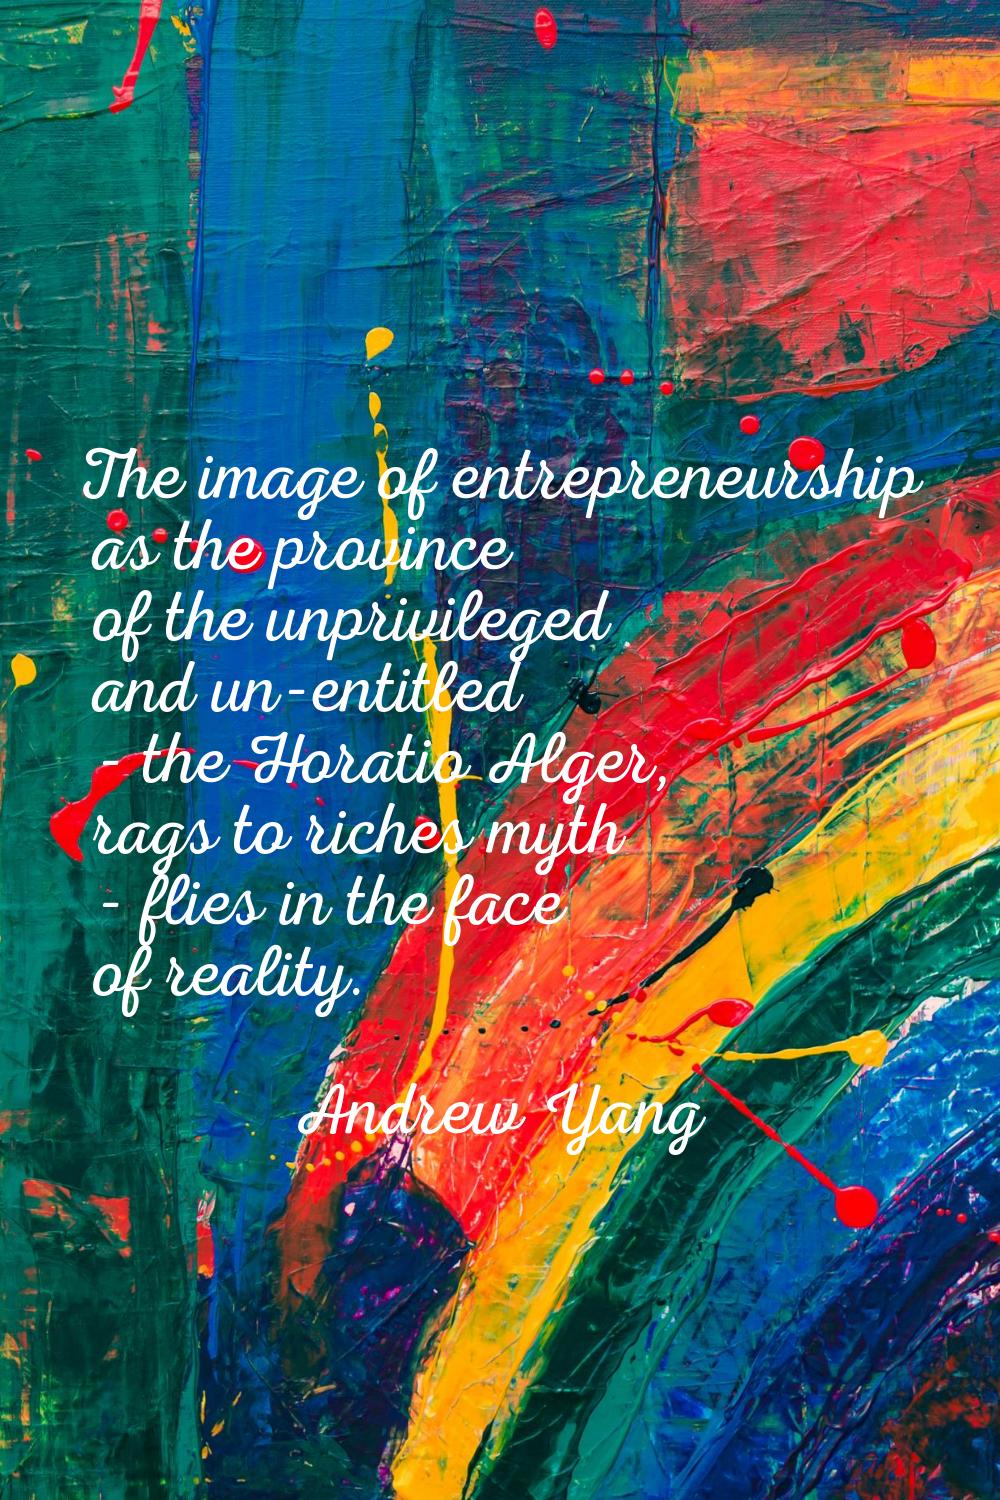 The image of entrepreneurship as the province of the unprivileged and un-entitled - the Horatio Alg